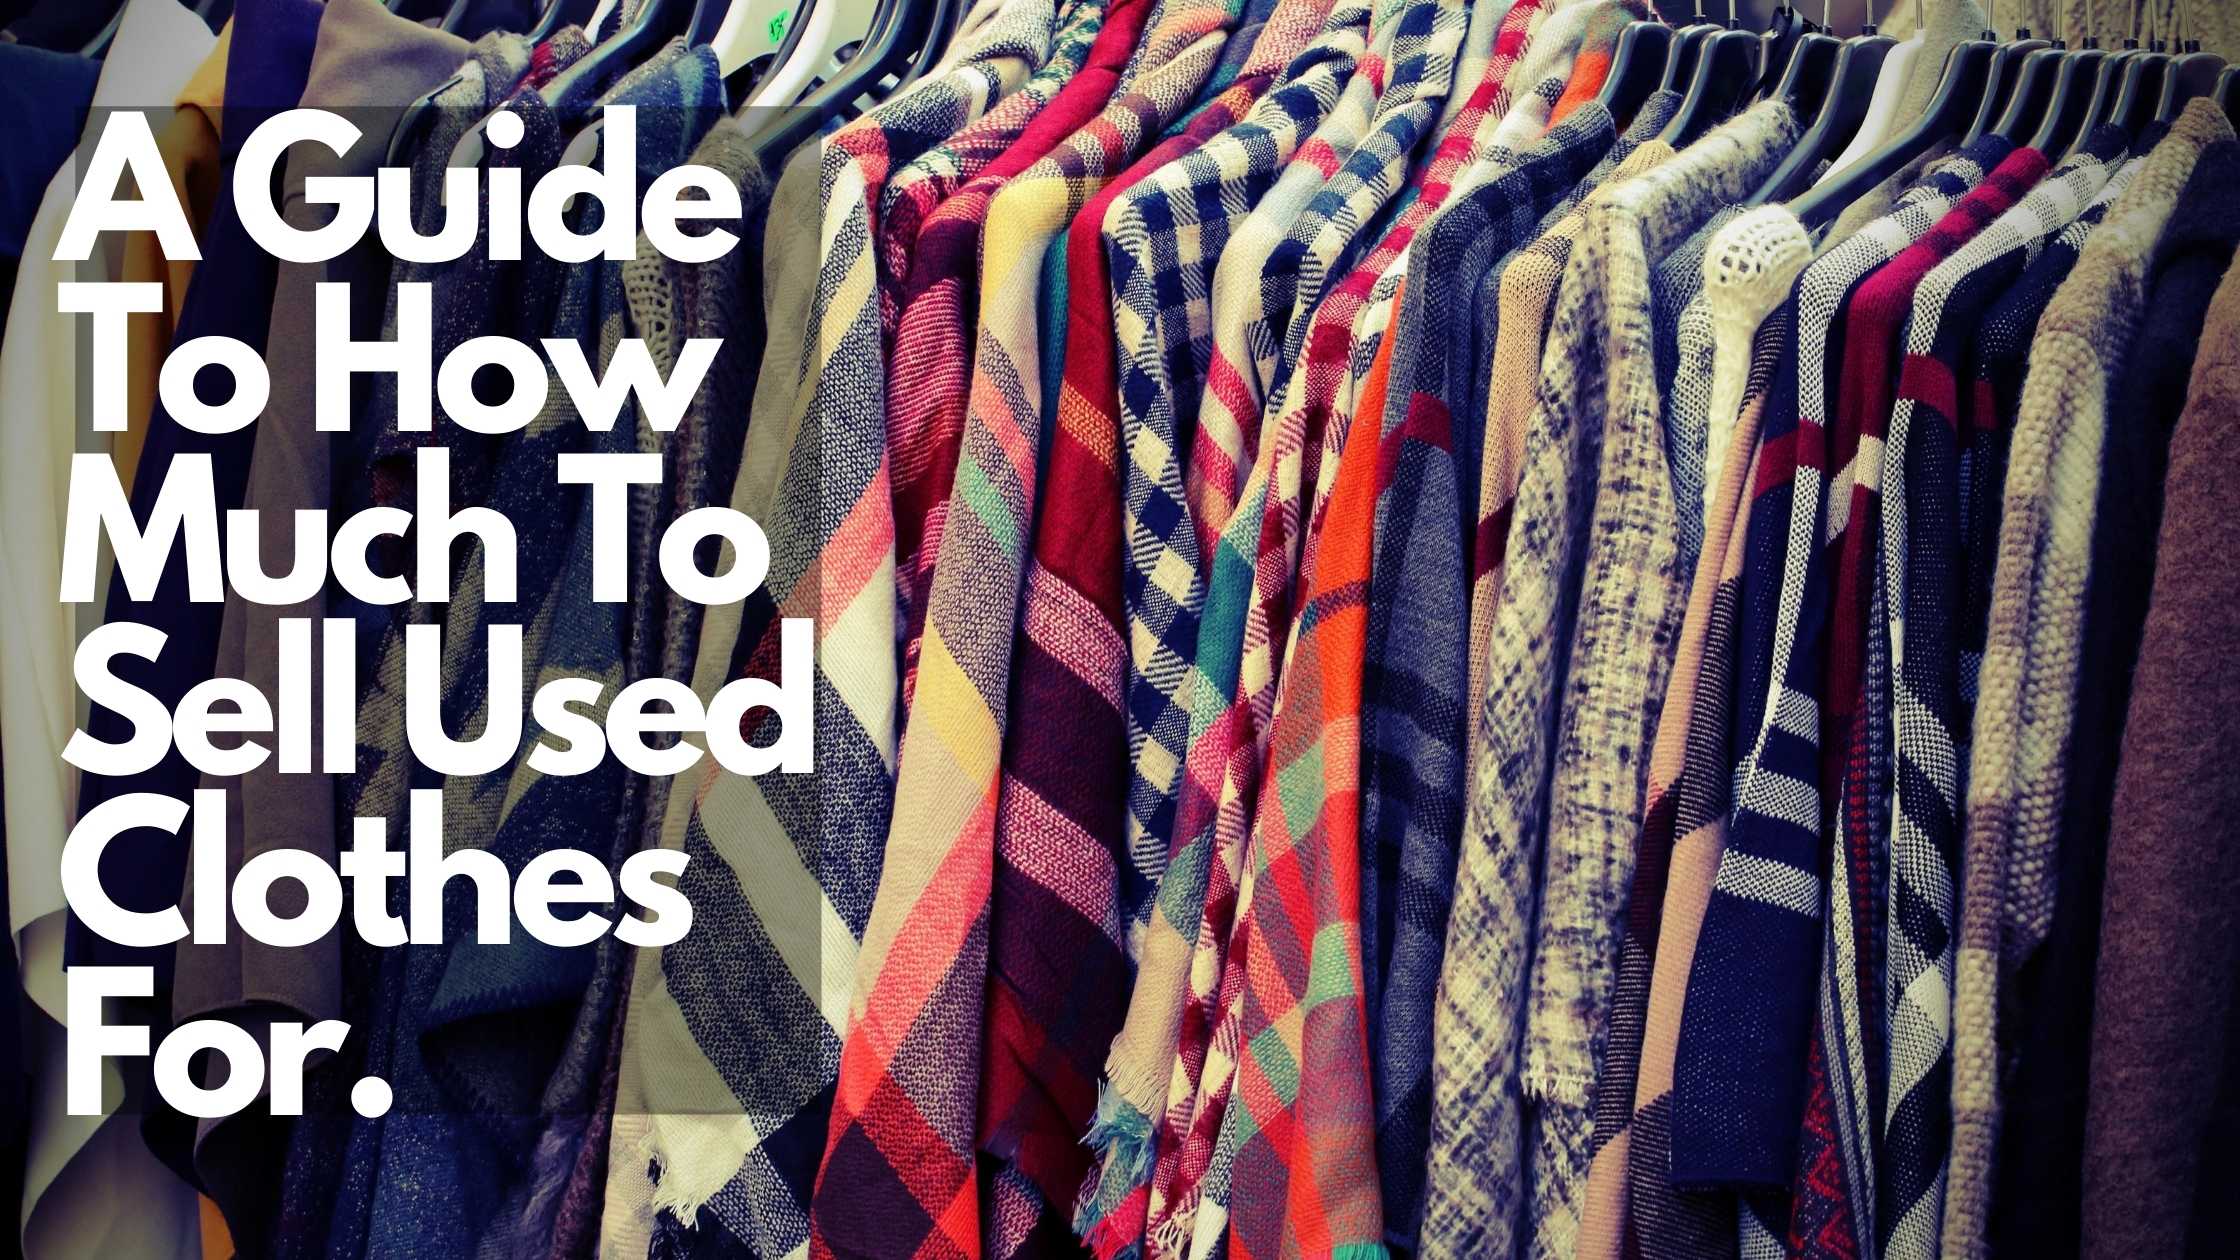 How to Sell Used Clothes Online, Sell Old Clothes